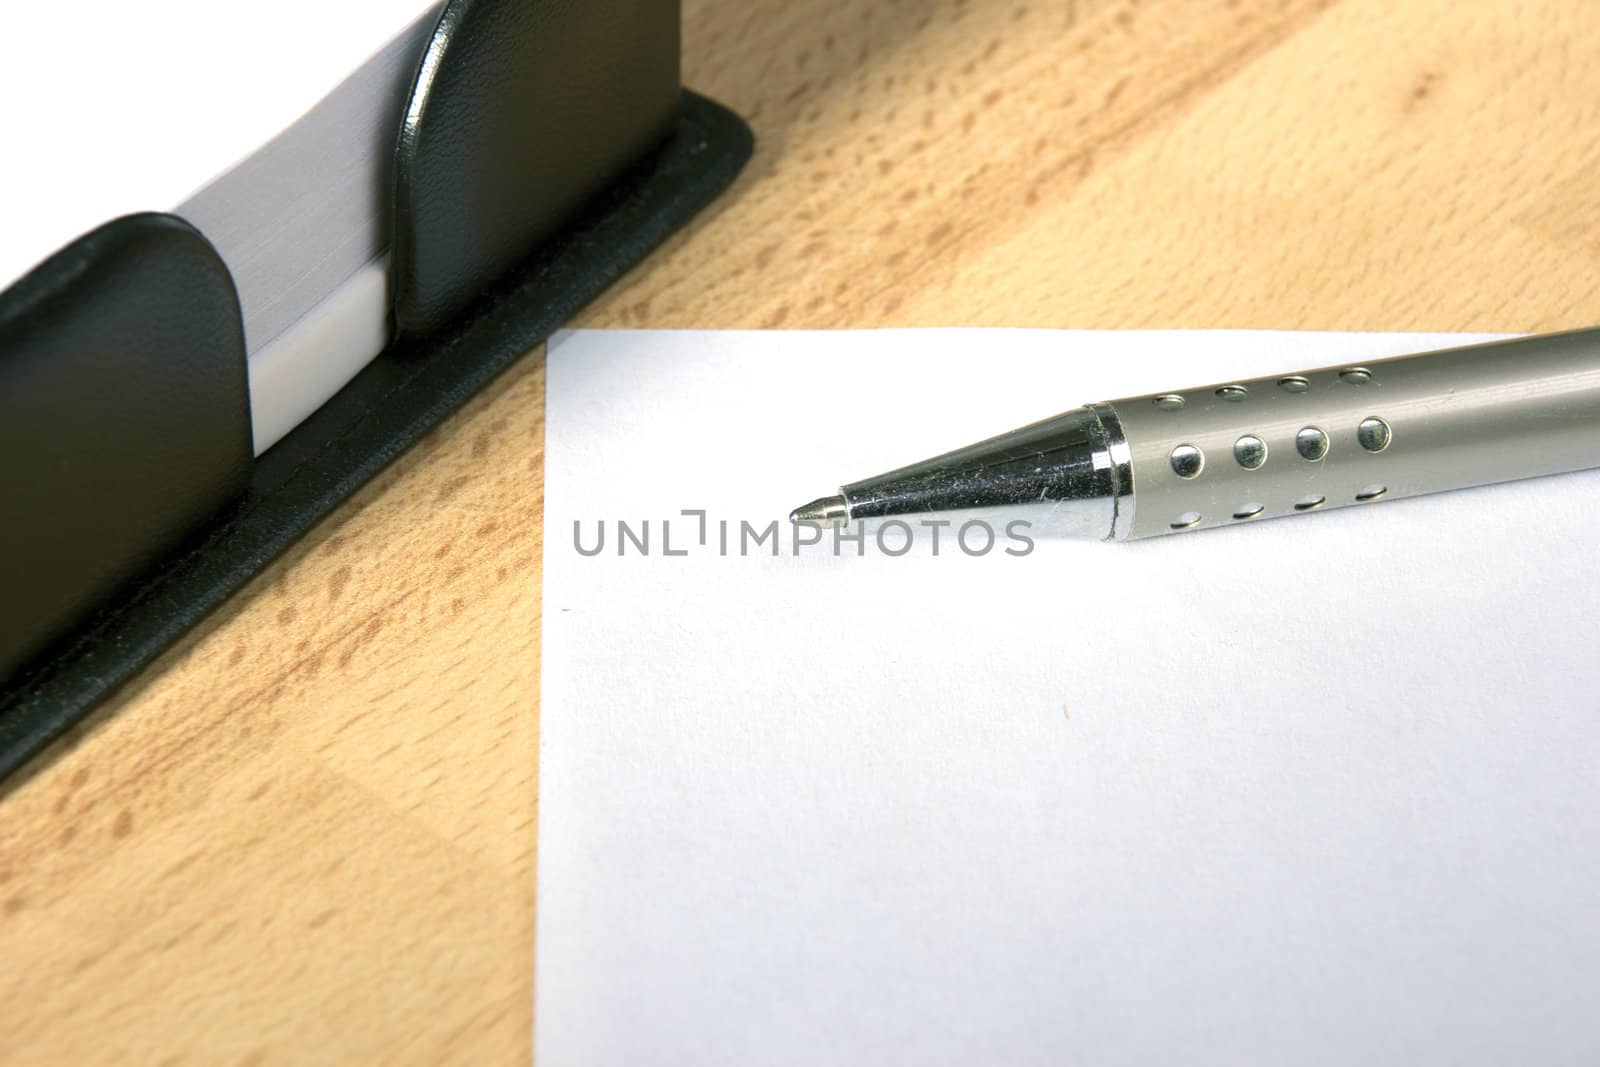 White sheet of paper and a silver pen at work desk